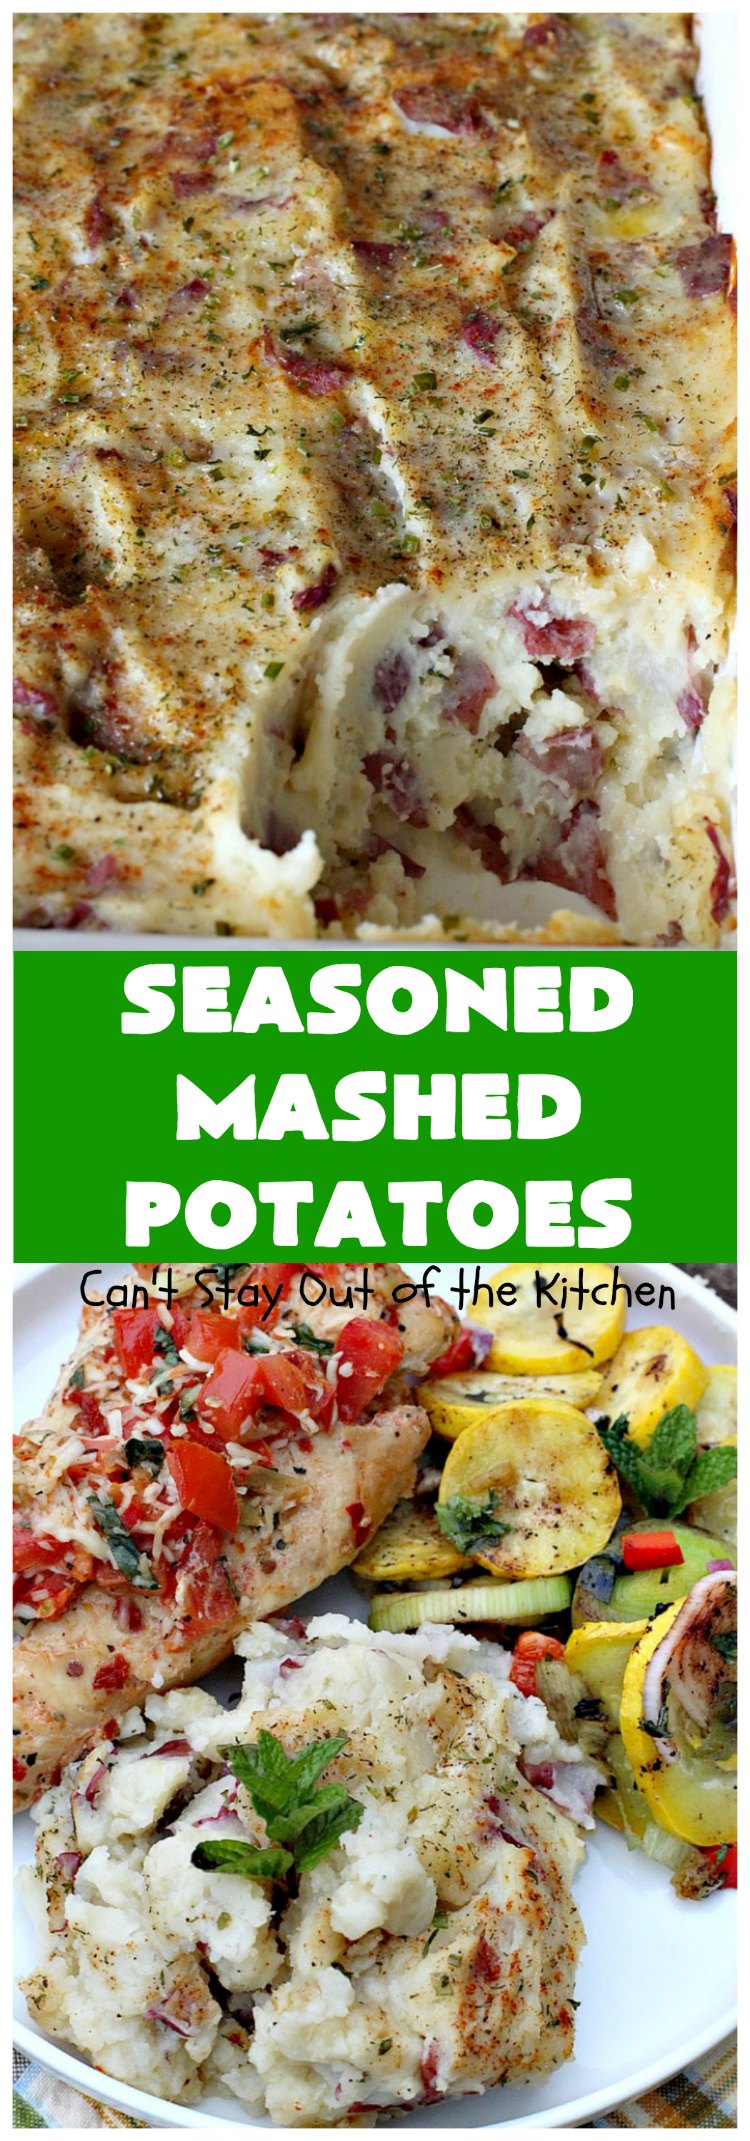 Seasoned Mashed Potatoes | Can't Stay Out of the Kitchen